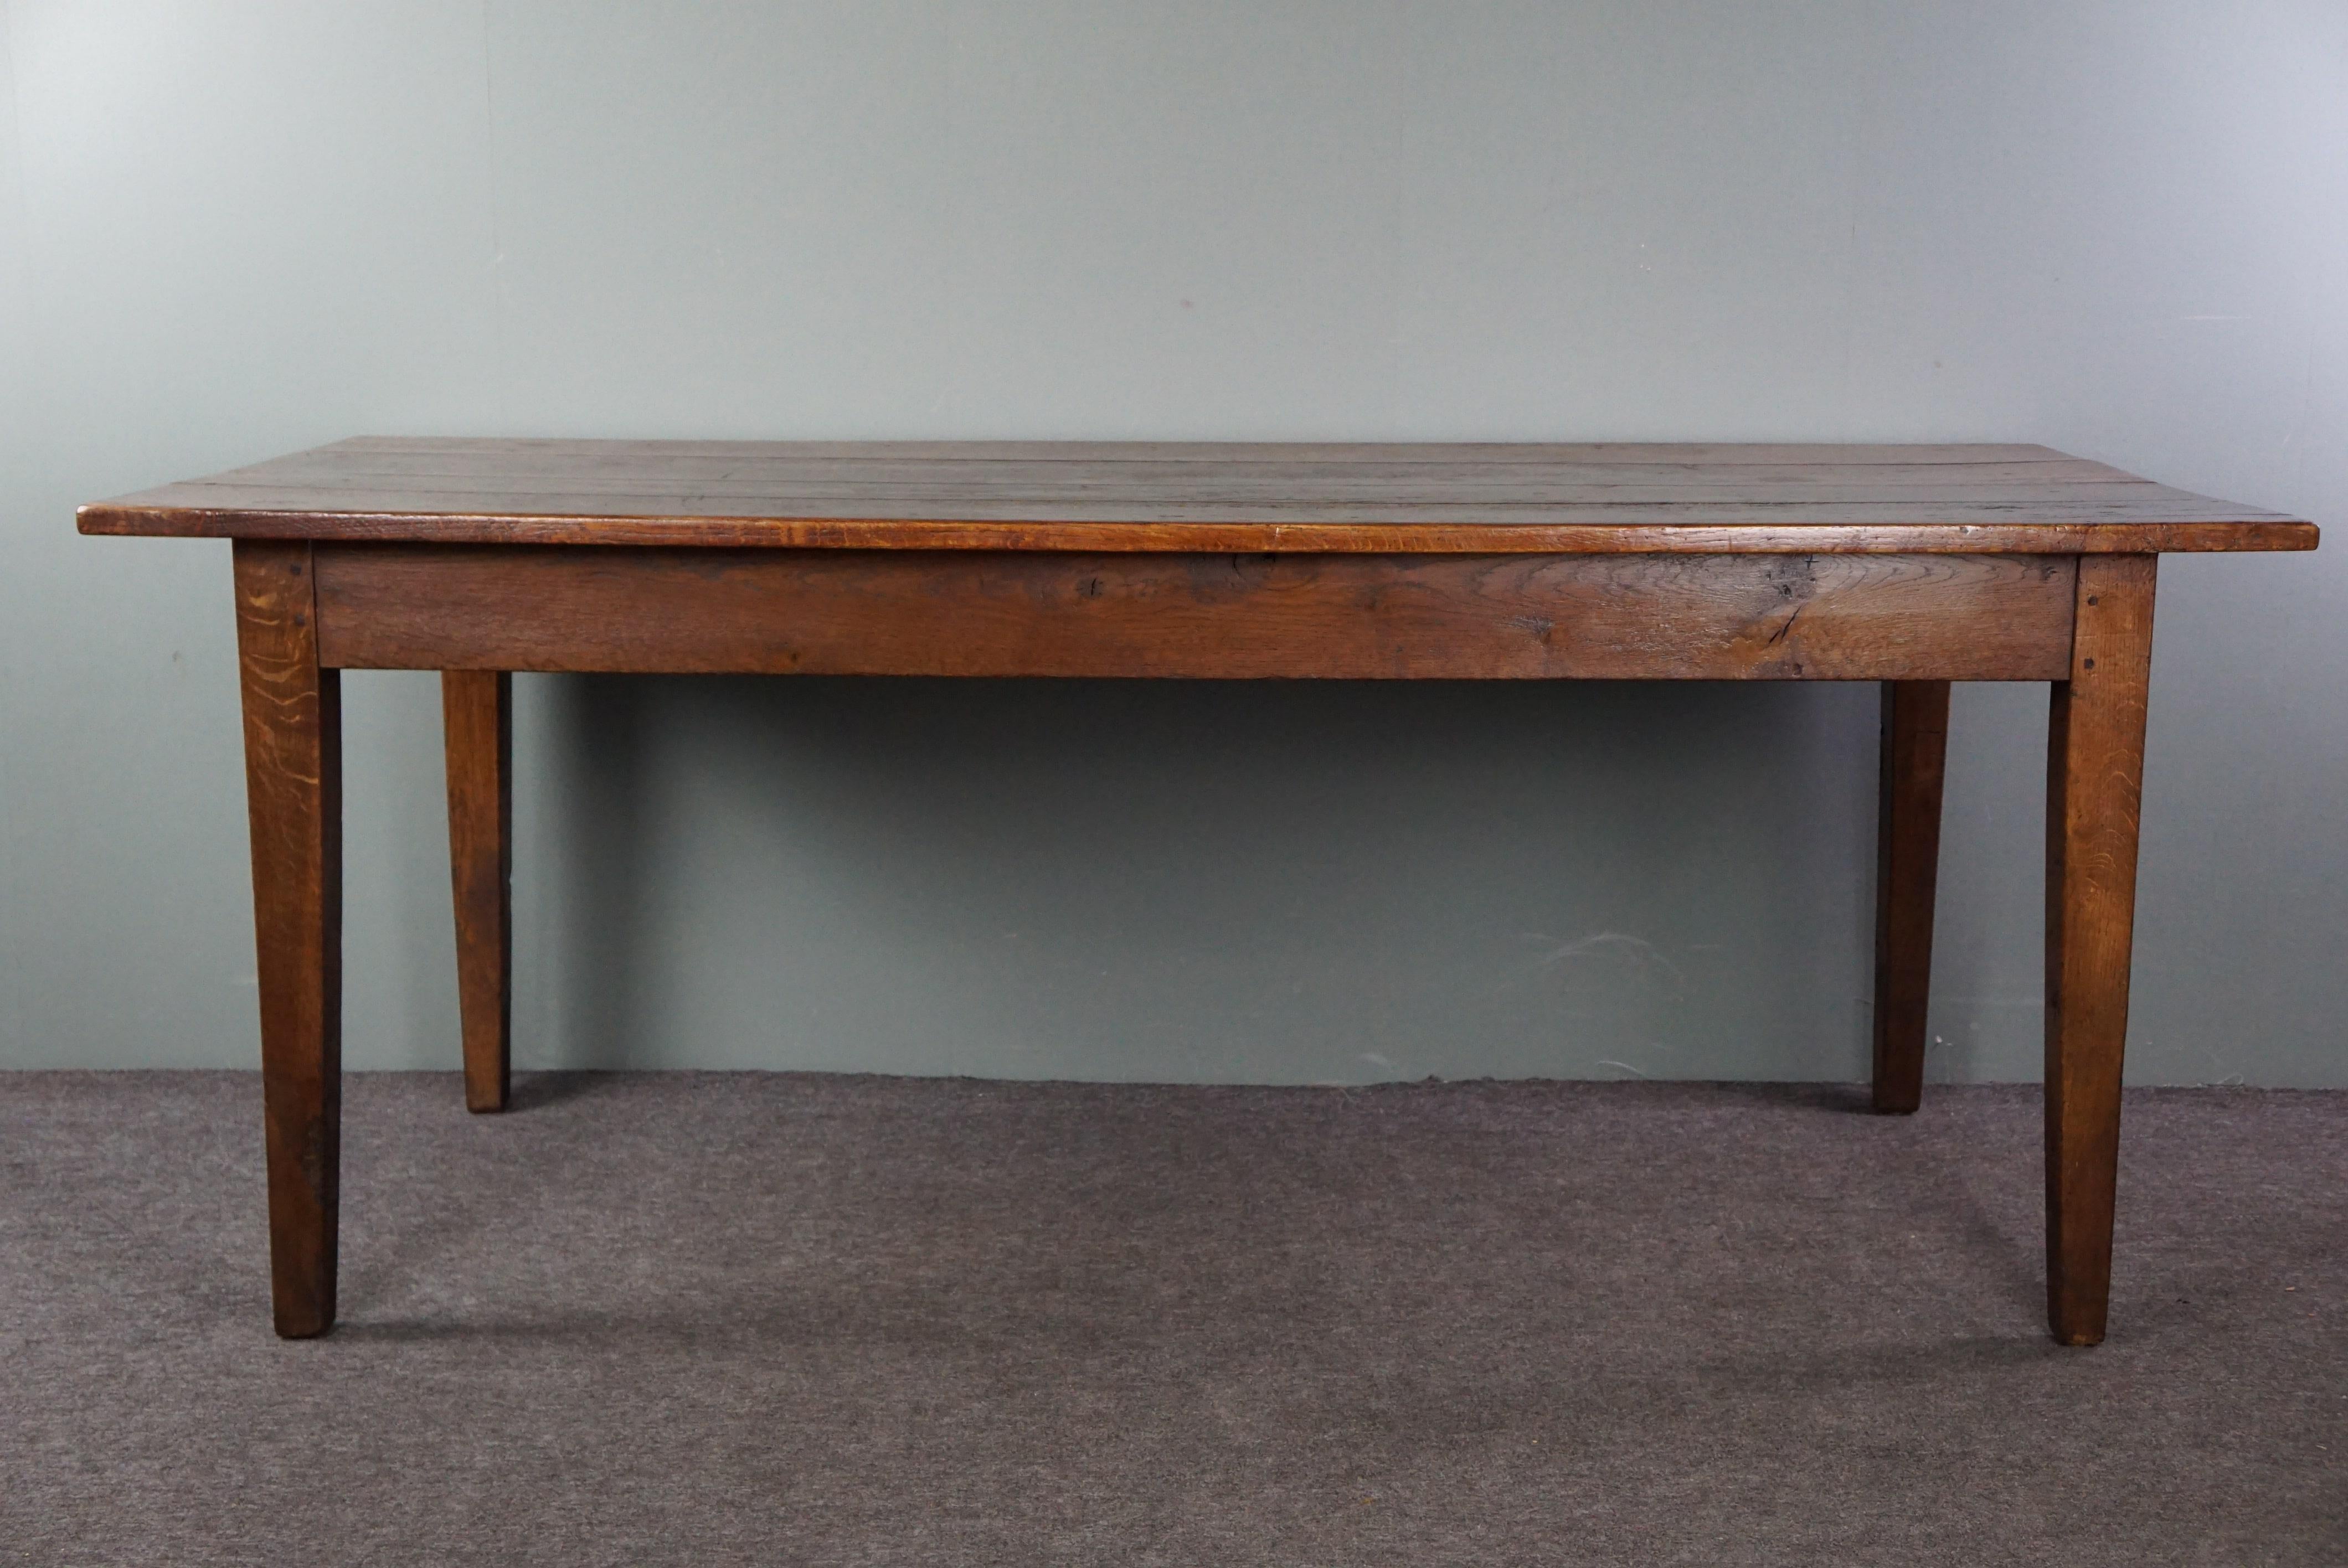 Wood French dining table dating back to the early 19th century with warm colors For Sale